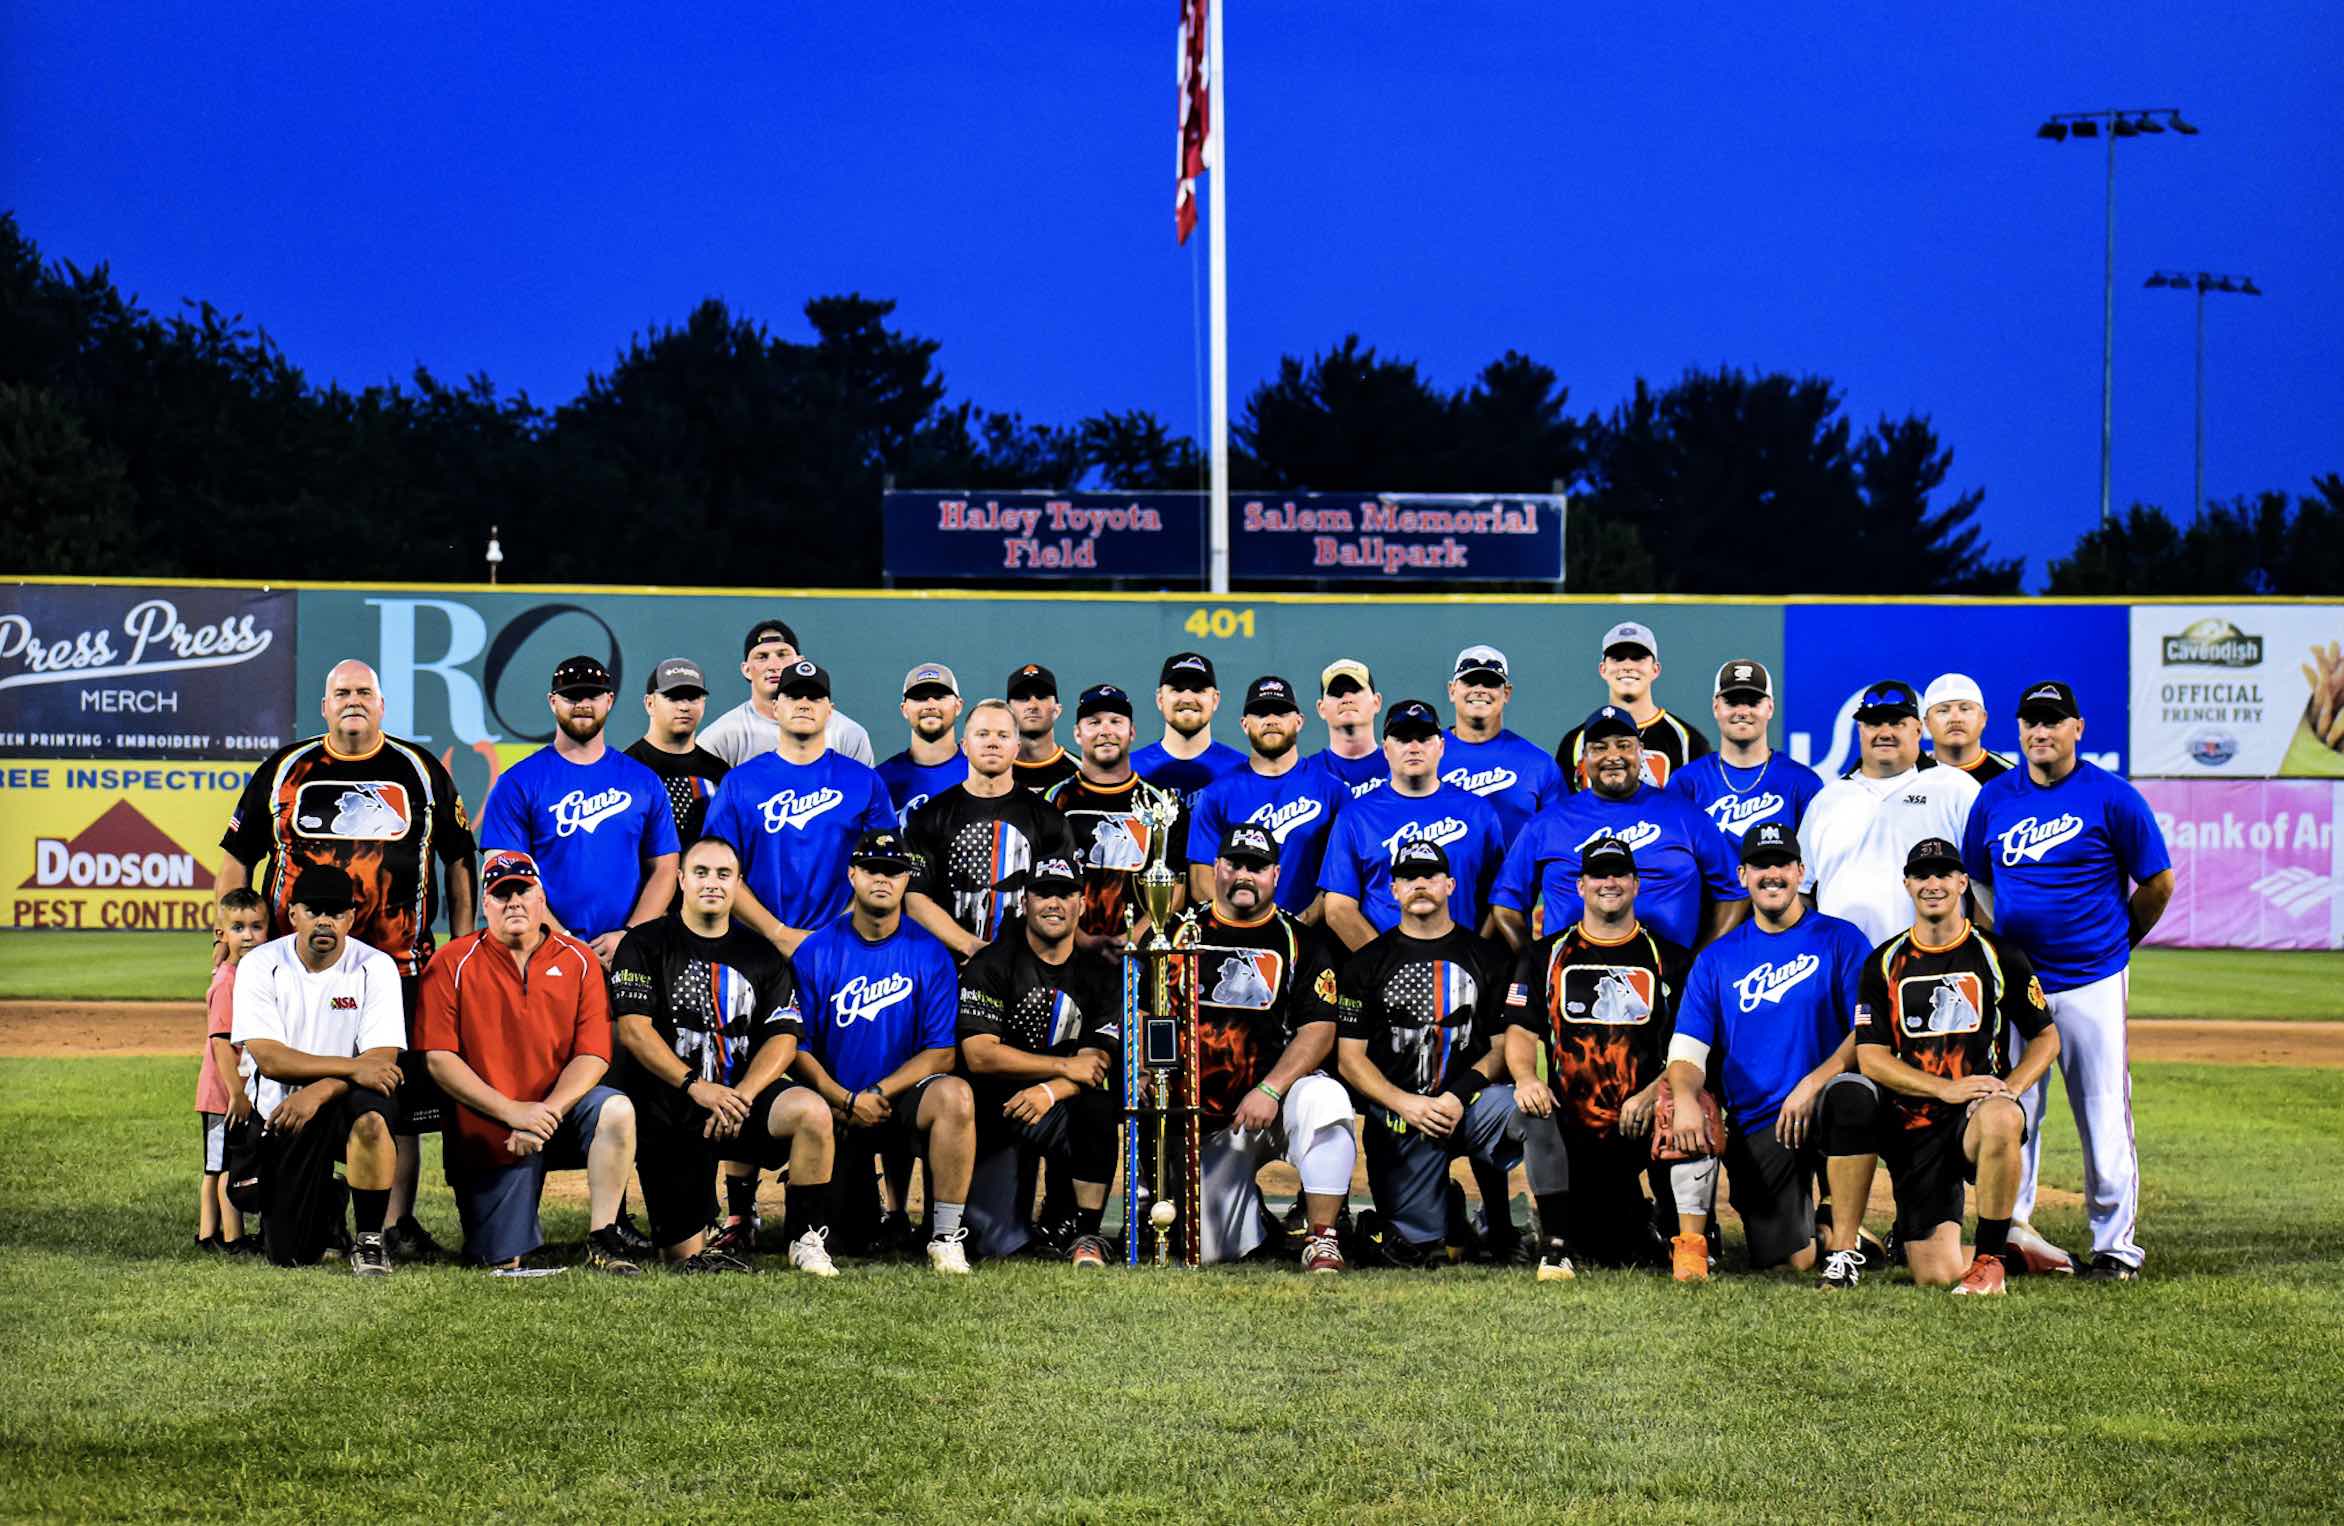 Guns and Hoses Charity Softball Game this Friday